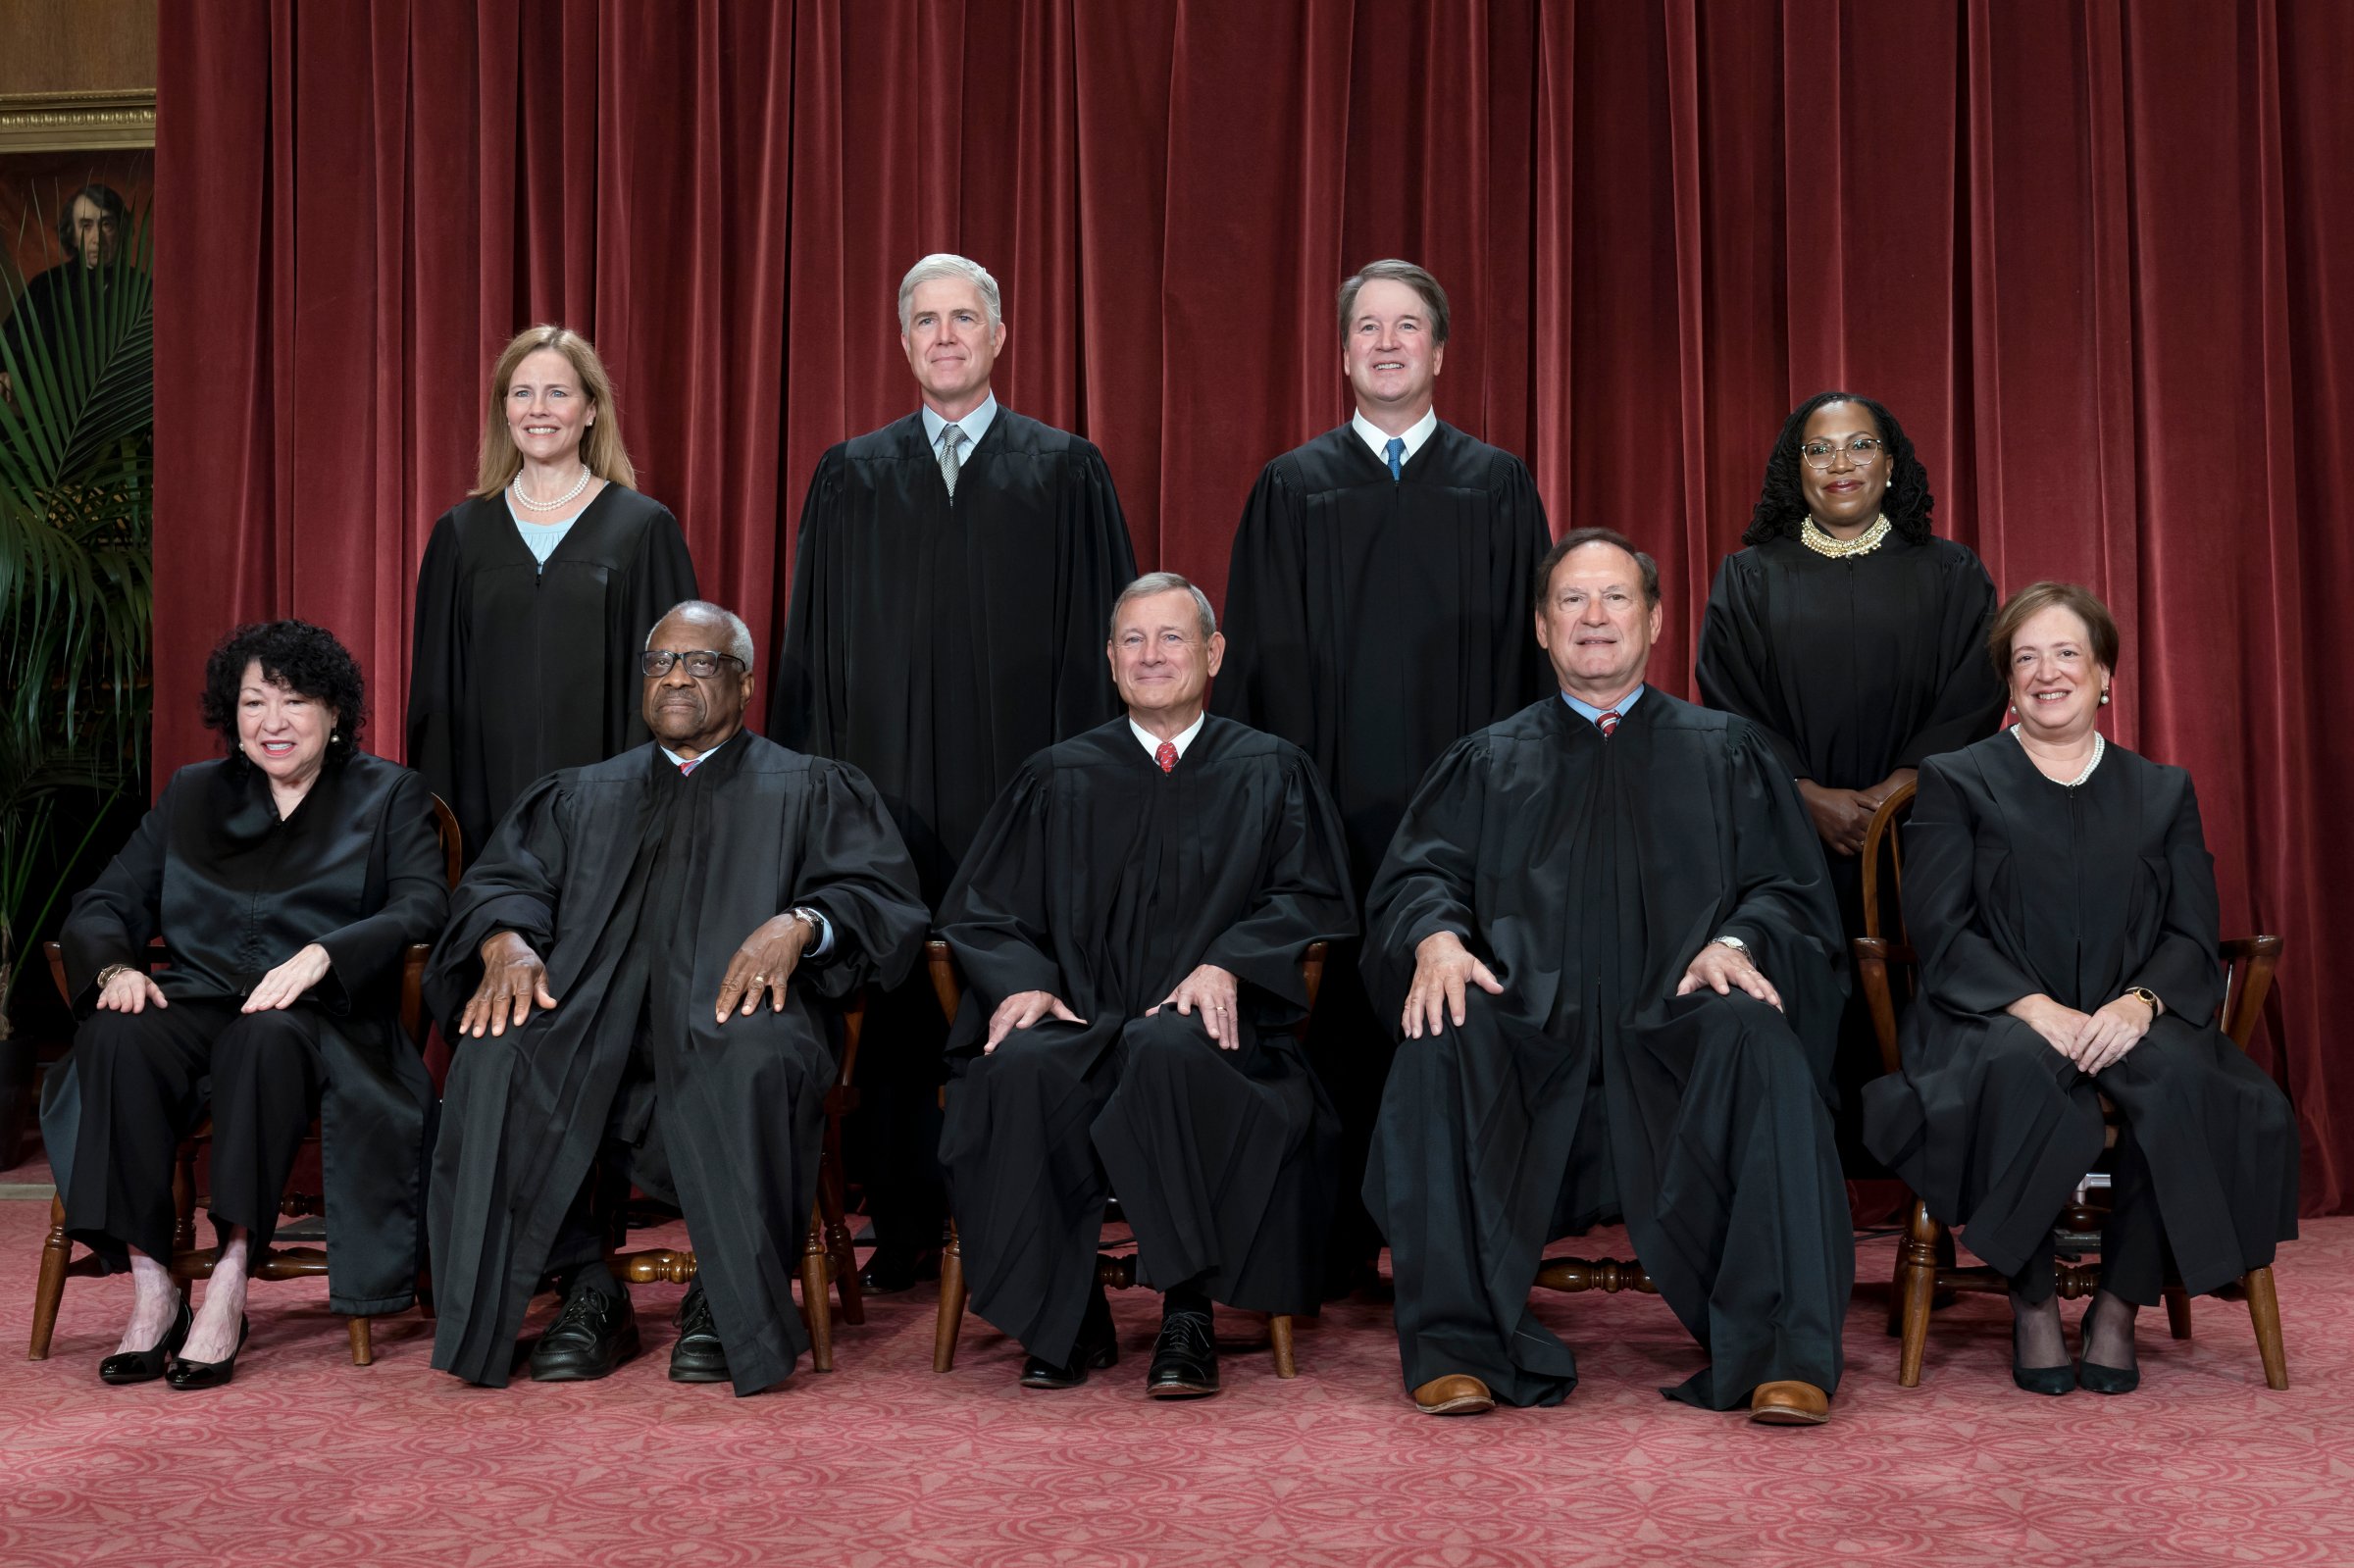 Members of the Supreme Court sit for a new group portrait following the addition of Associate Justice Ketanji Brown Jackson, at the Supreme Court building in Washington, Oct. 7, 2022.